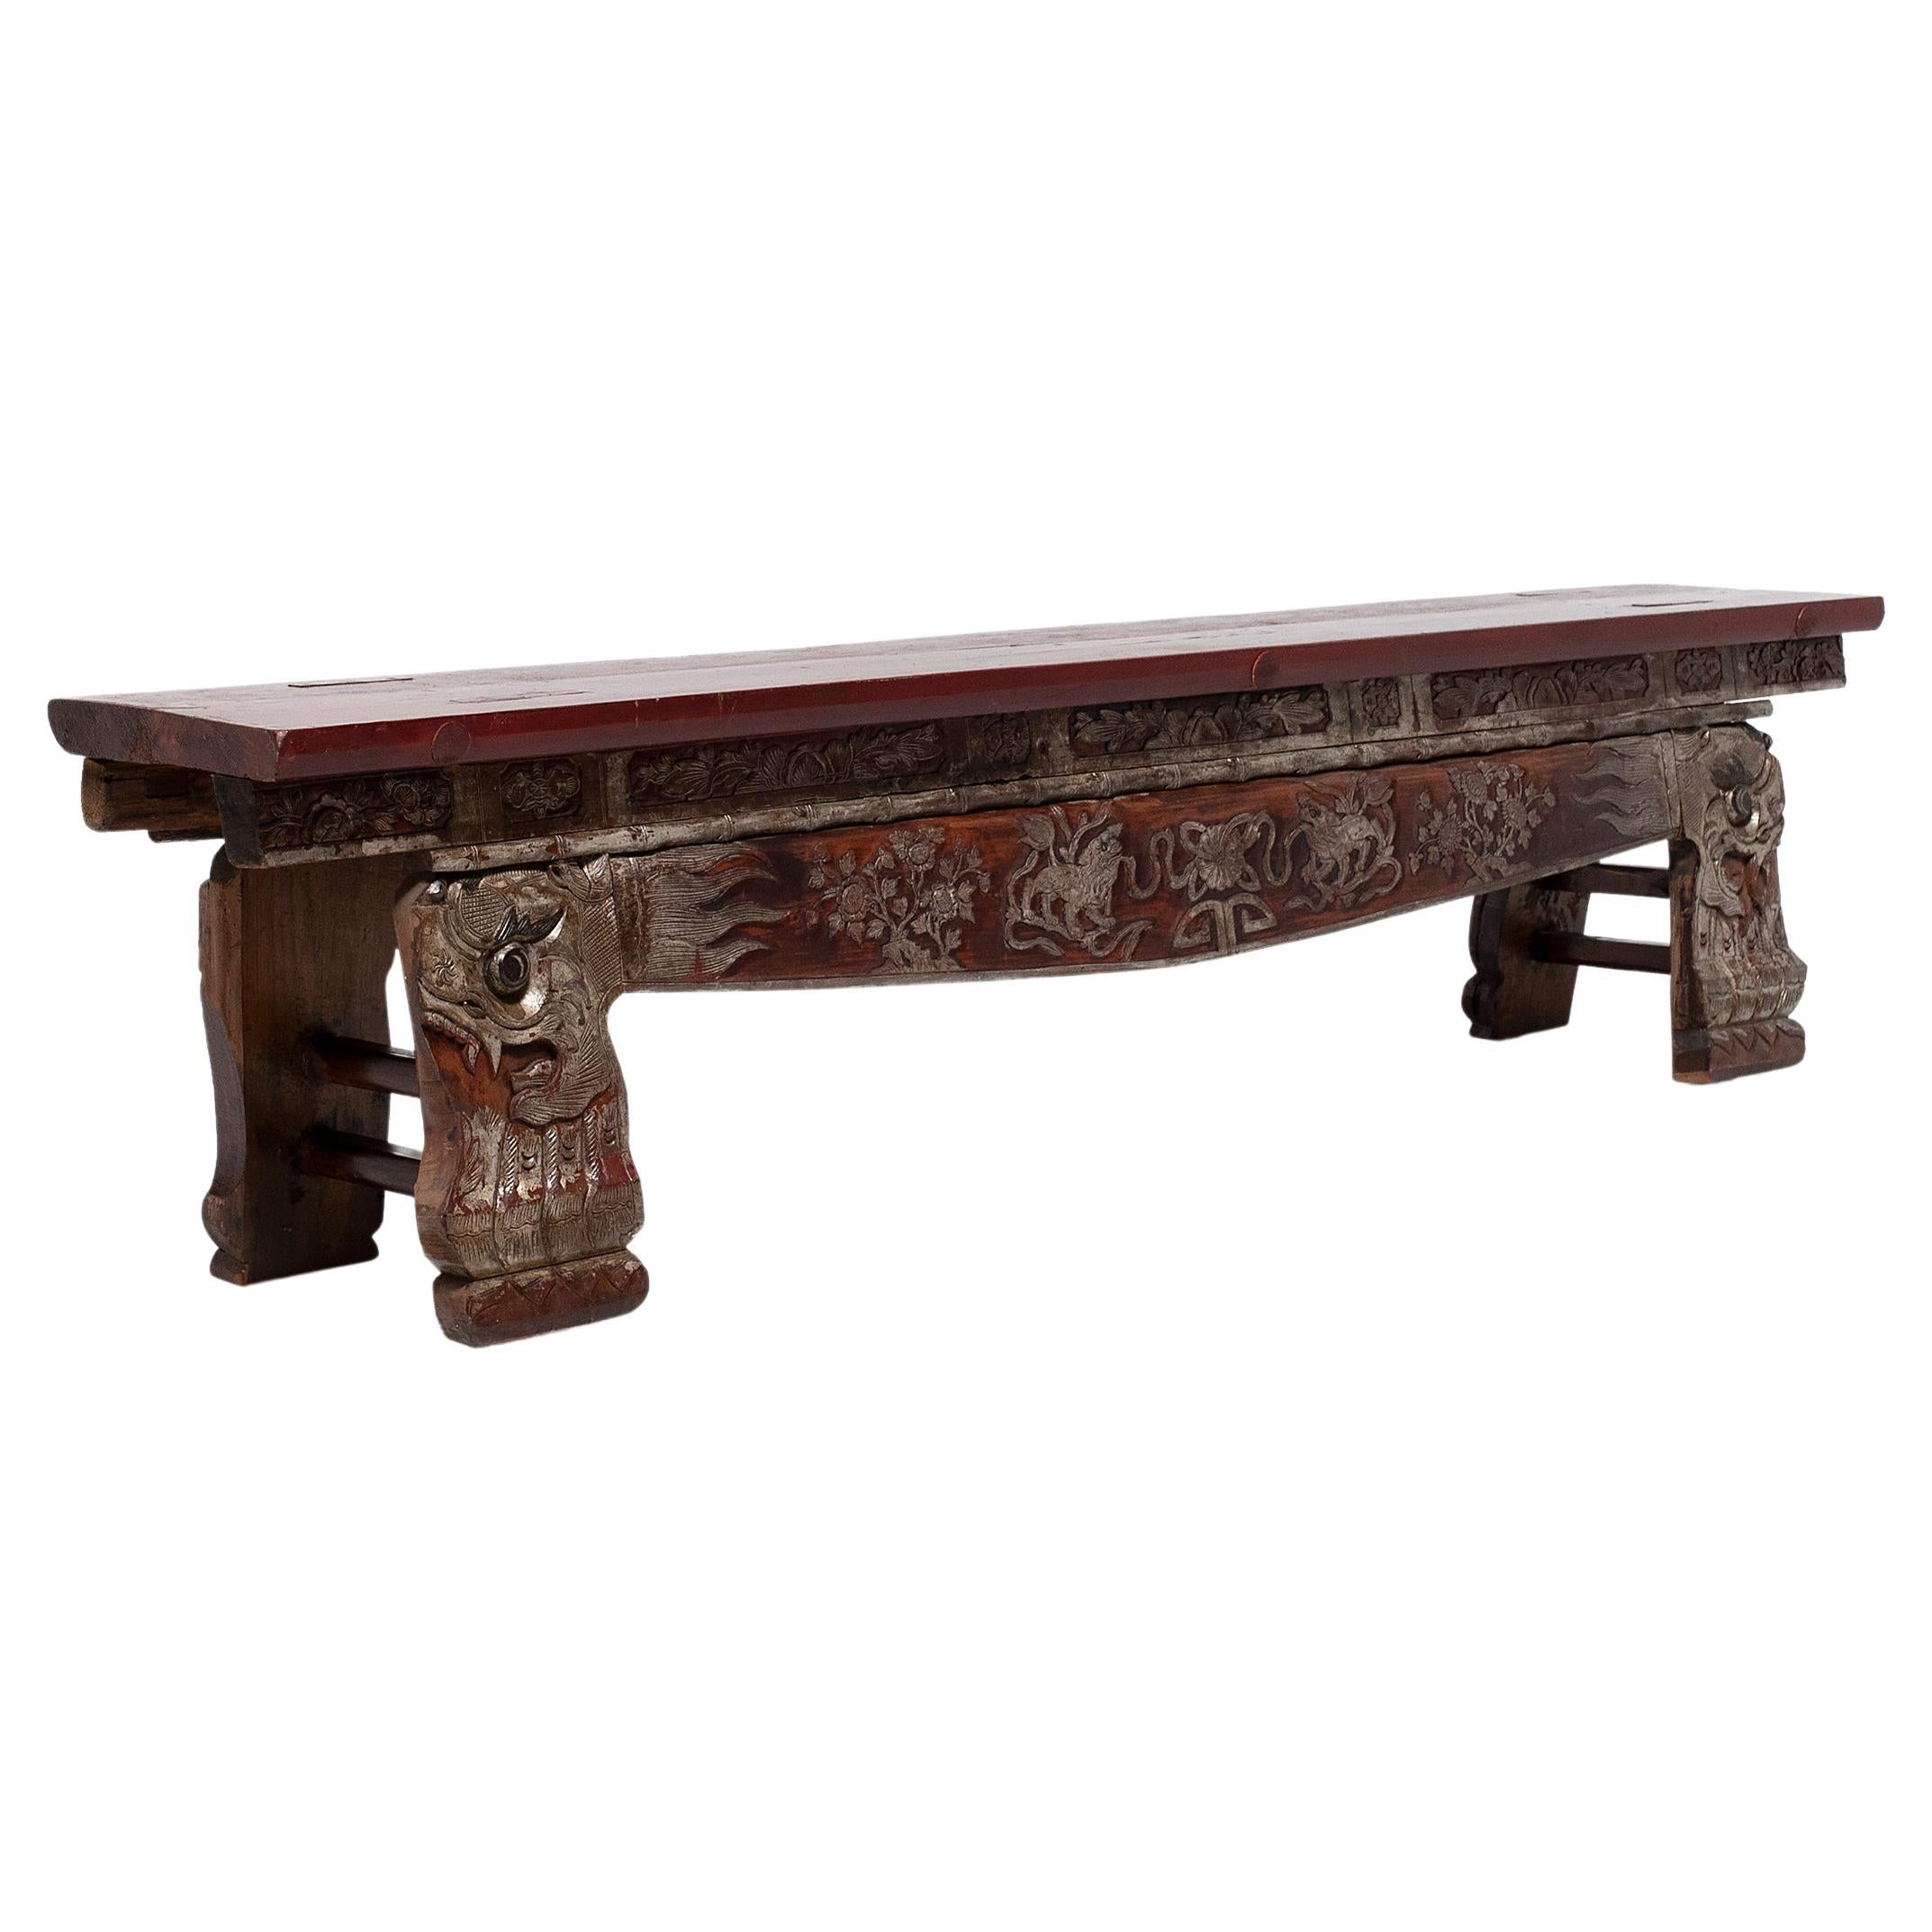 Chinese Lacquered Theater Bench with Dragon Carvings, c. 1850 For Sale